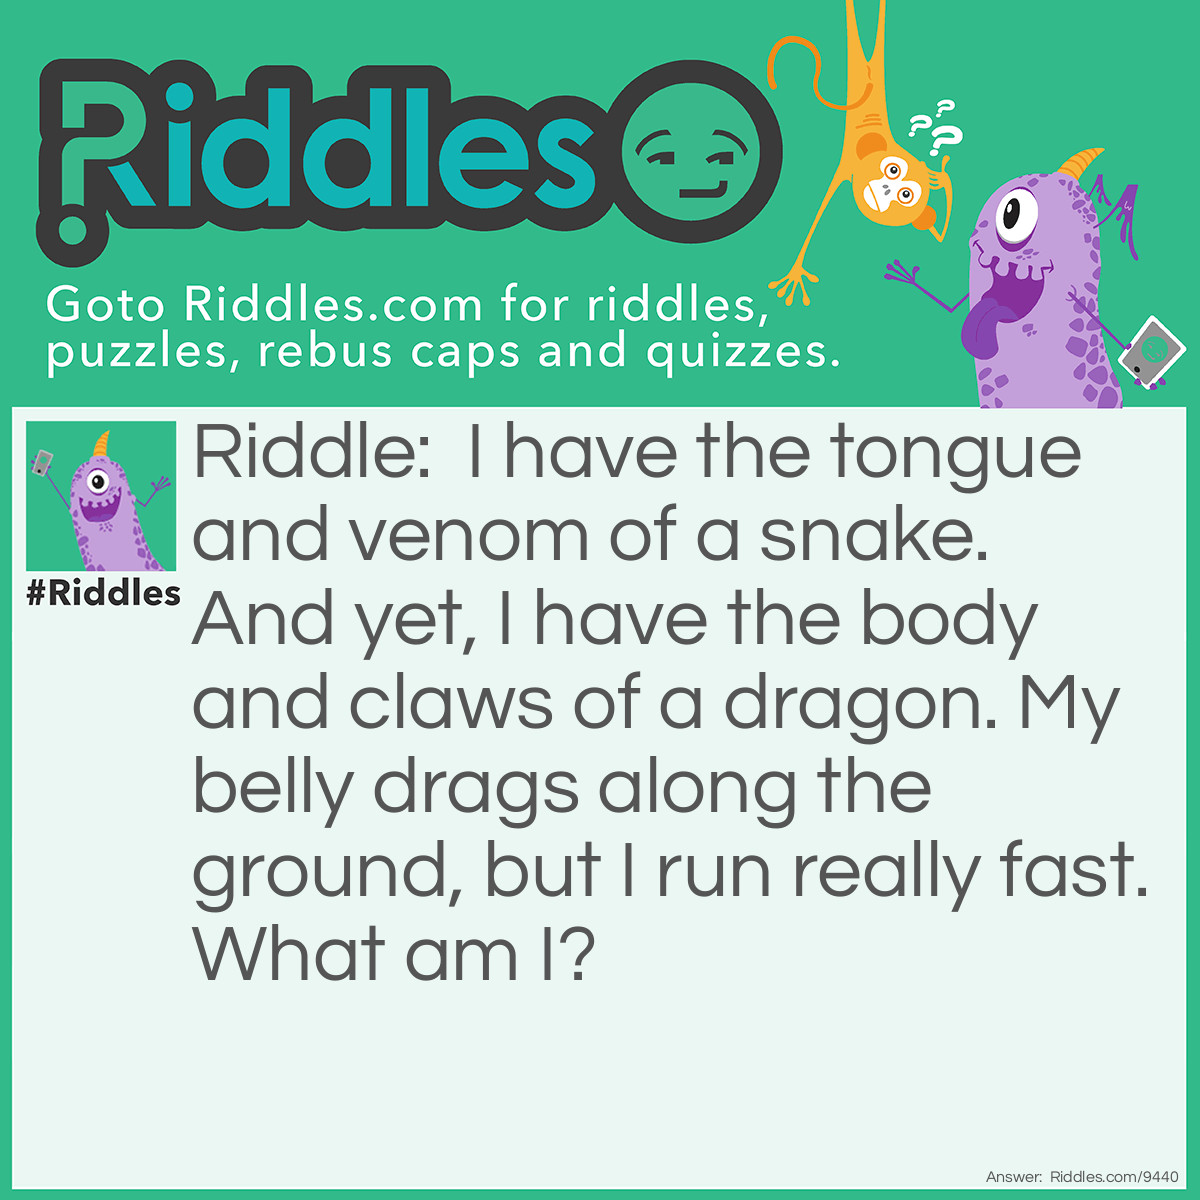 Riddle: I have the tongue and venom of a snake. And yet, I have the body and claws of a dragon. My belly drags along the ground, but I run really fast. What am I? Answer: A Komodo dragon!